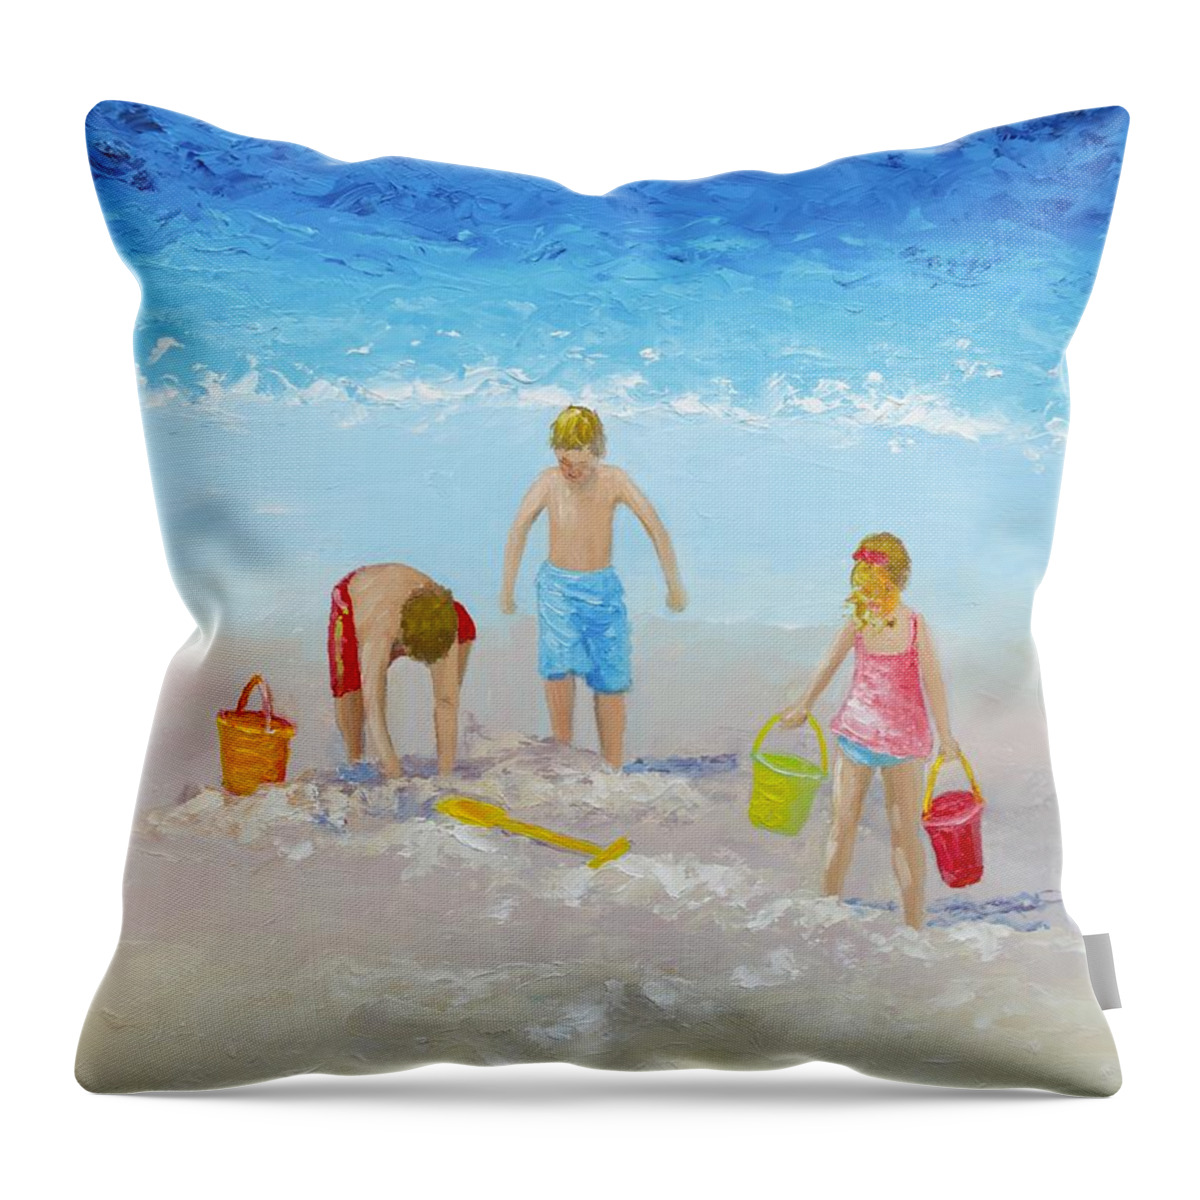 Beach Throw Pillow featuring the painting Beach painting - Sandcastles by Jan Matson